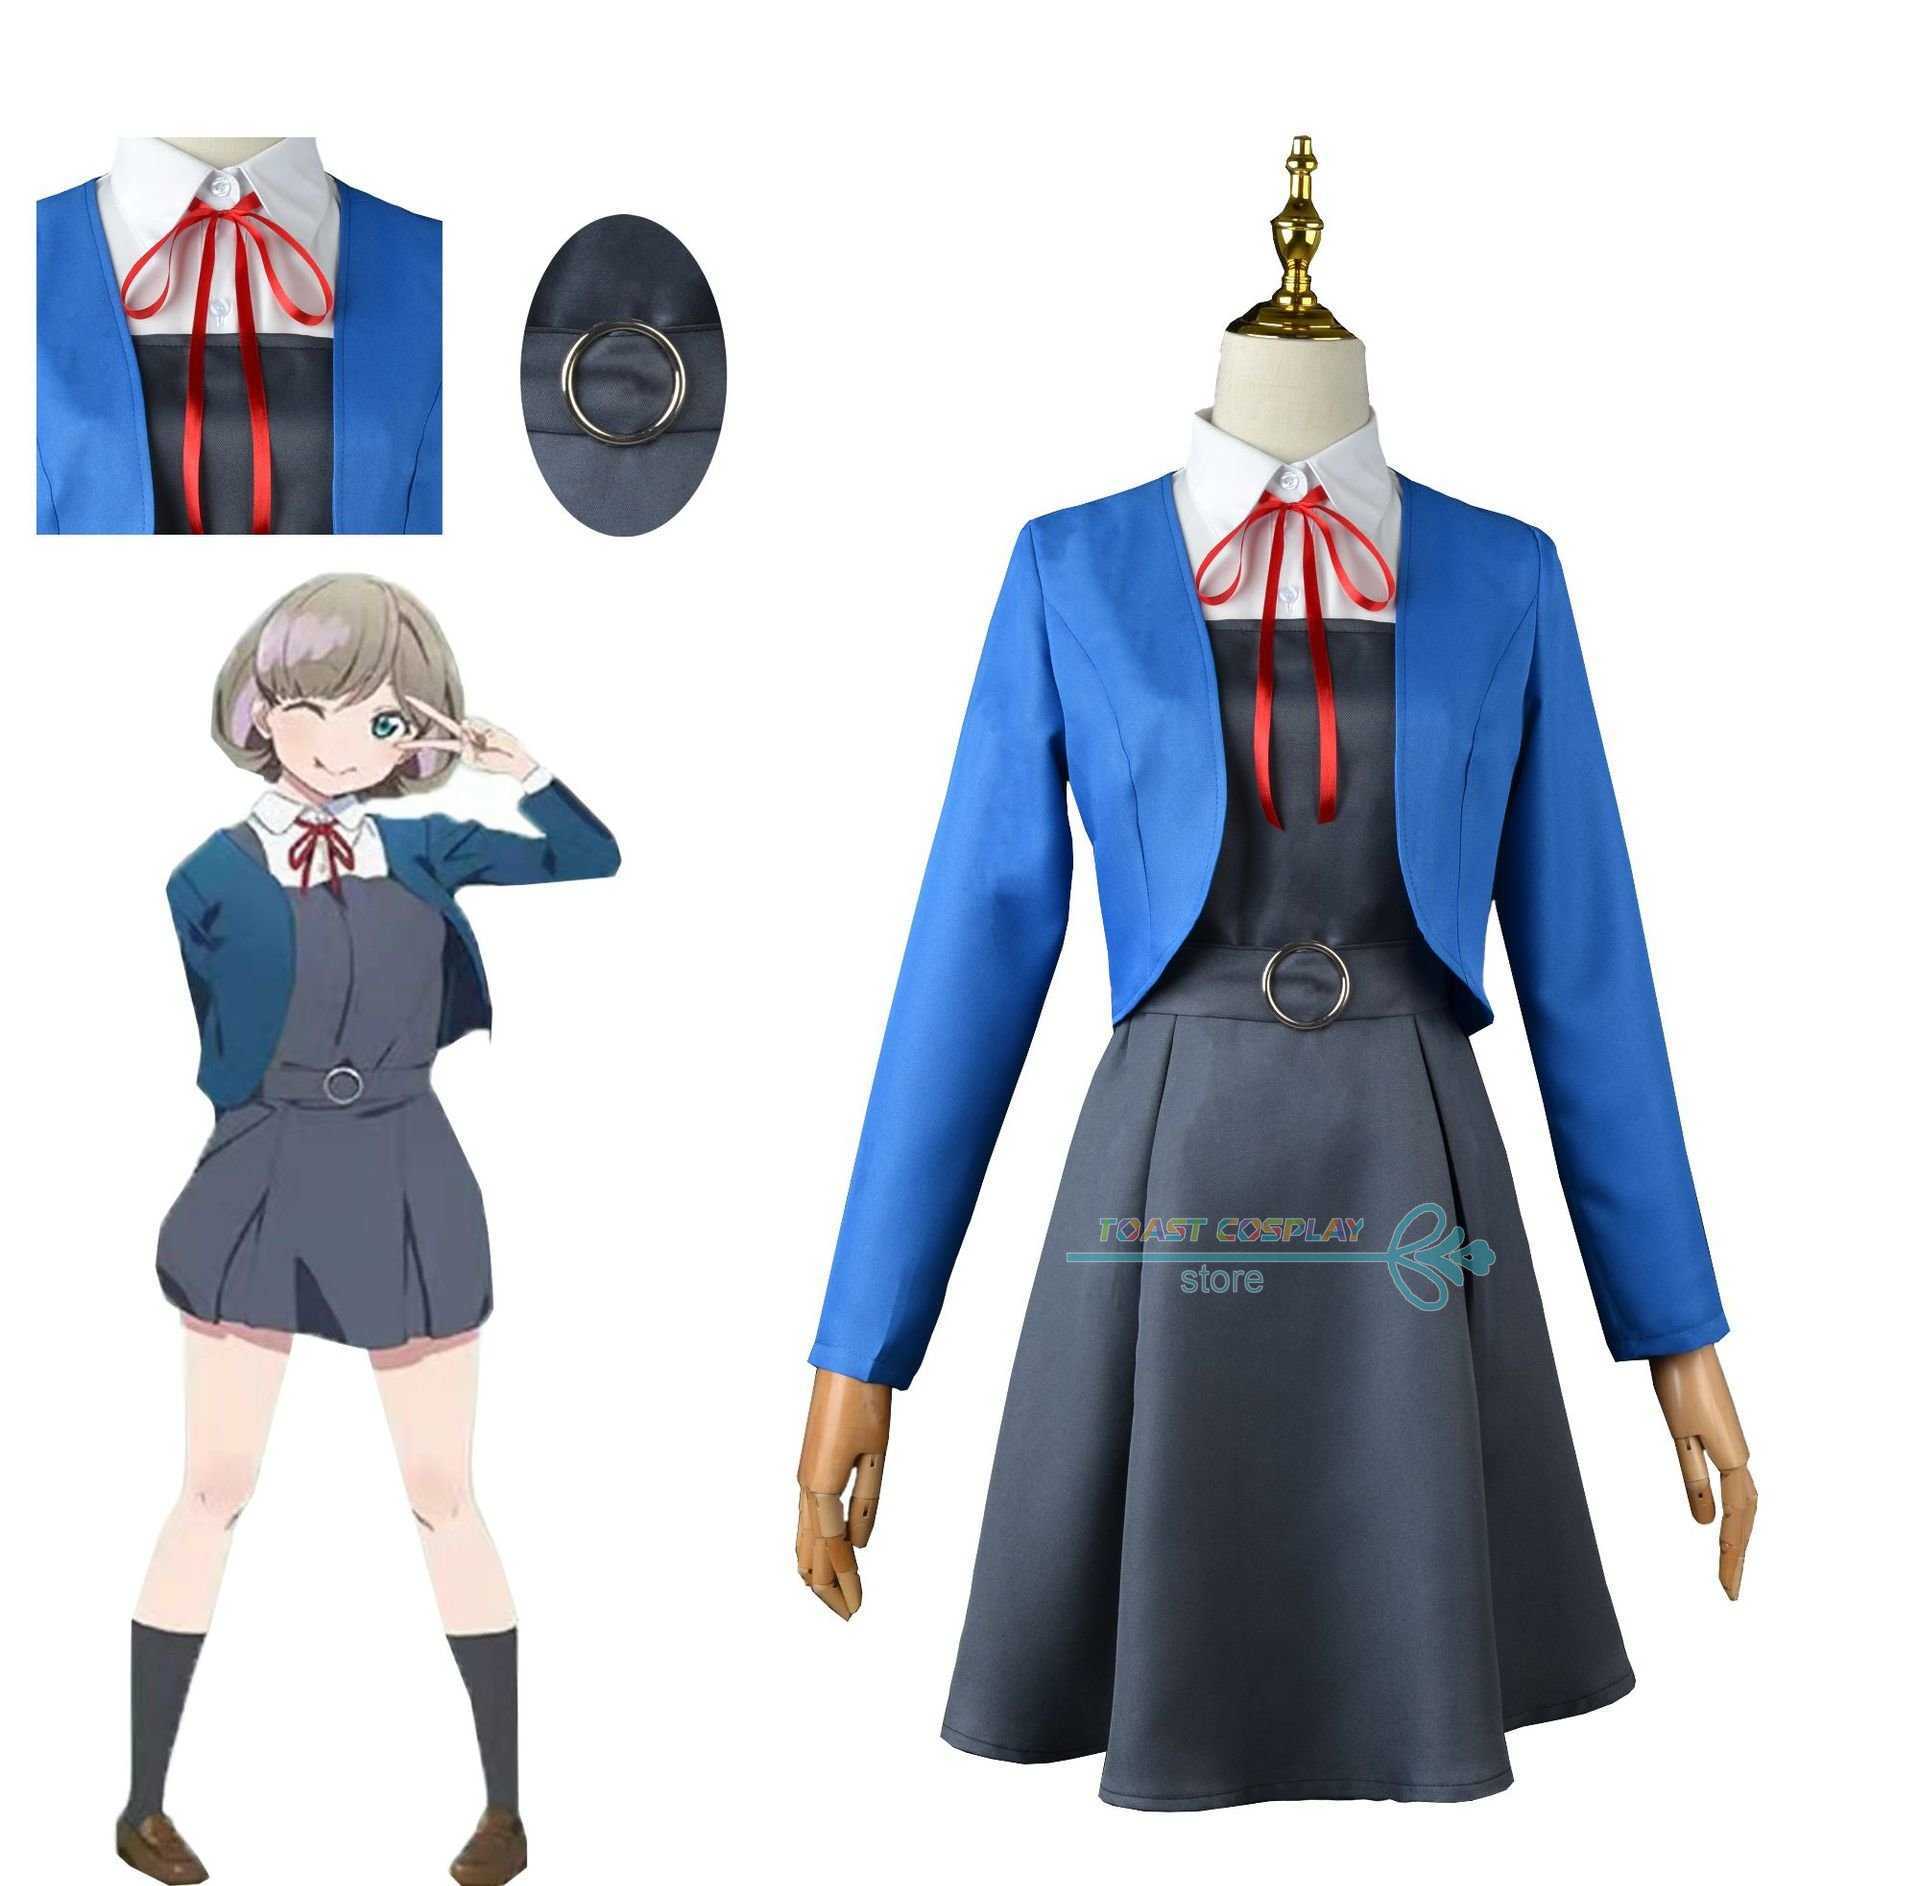 

Anime Costumes LoveLive Cosplay Tang Keke Anime Cos Halloween Party Female Blue and Cute Come Jk Uniform Preppy Style Z0602